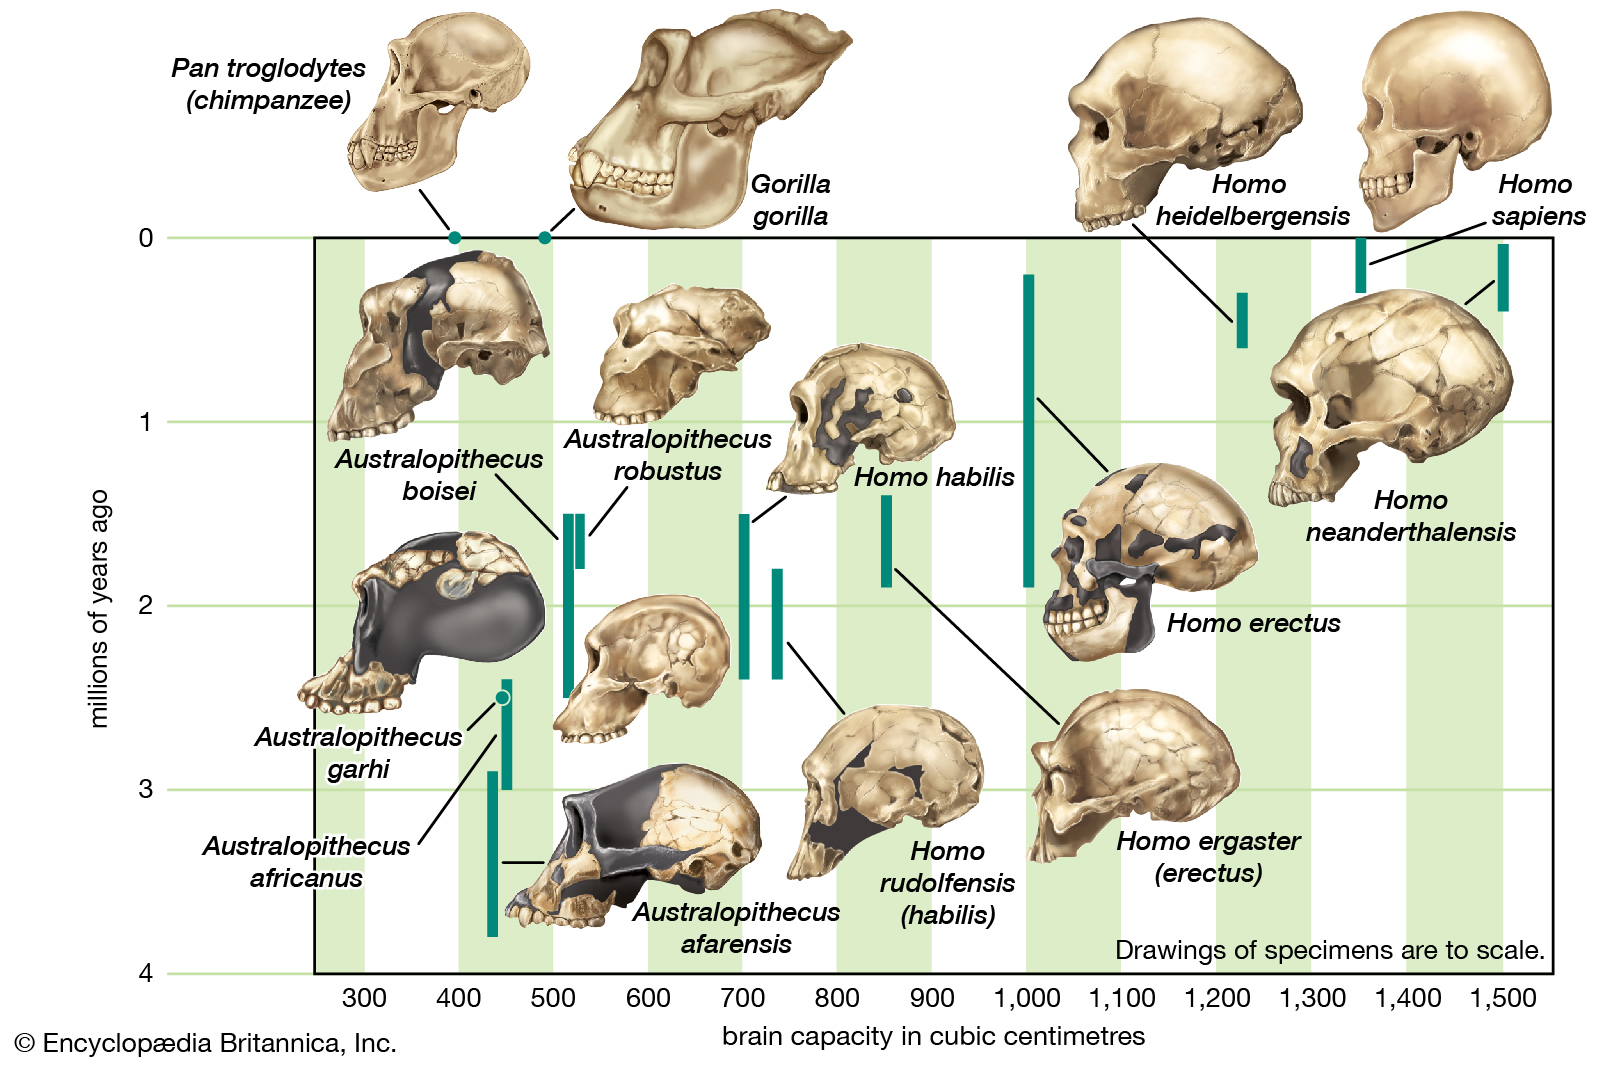 HUMAN EVOLUTION EVIDENCE CONSISTS OF APE, HUMAN, AND A MIX OF THE TWO ...